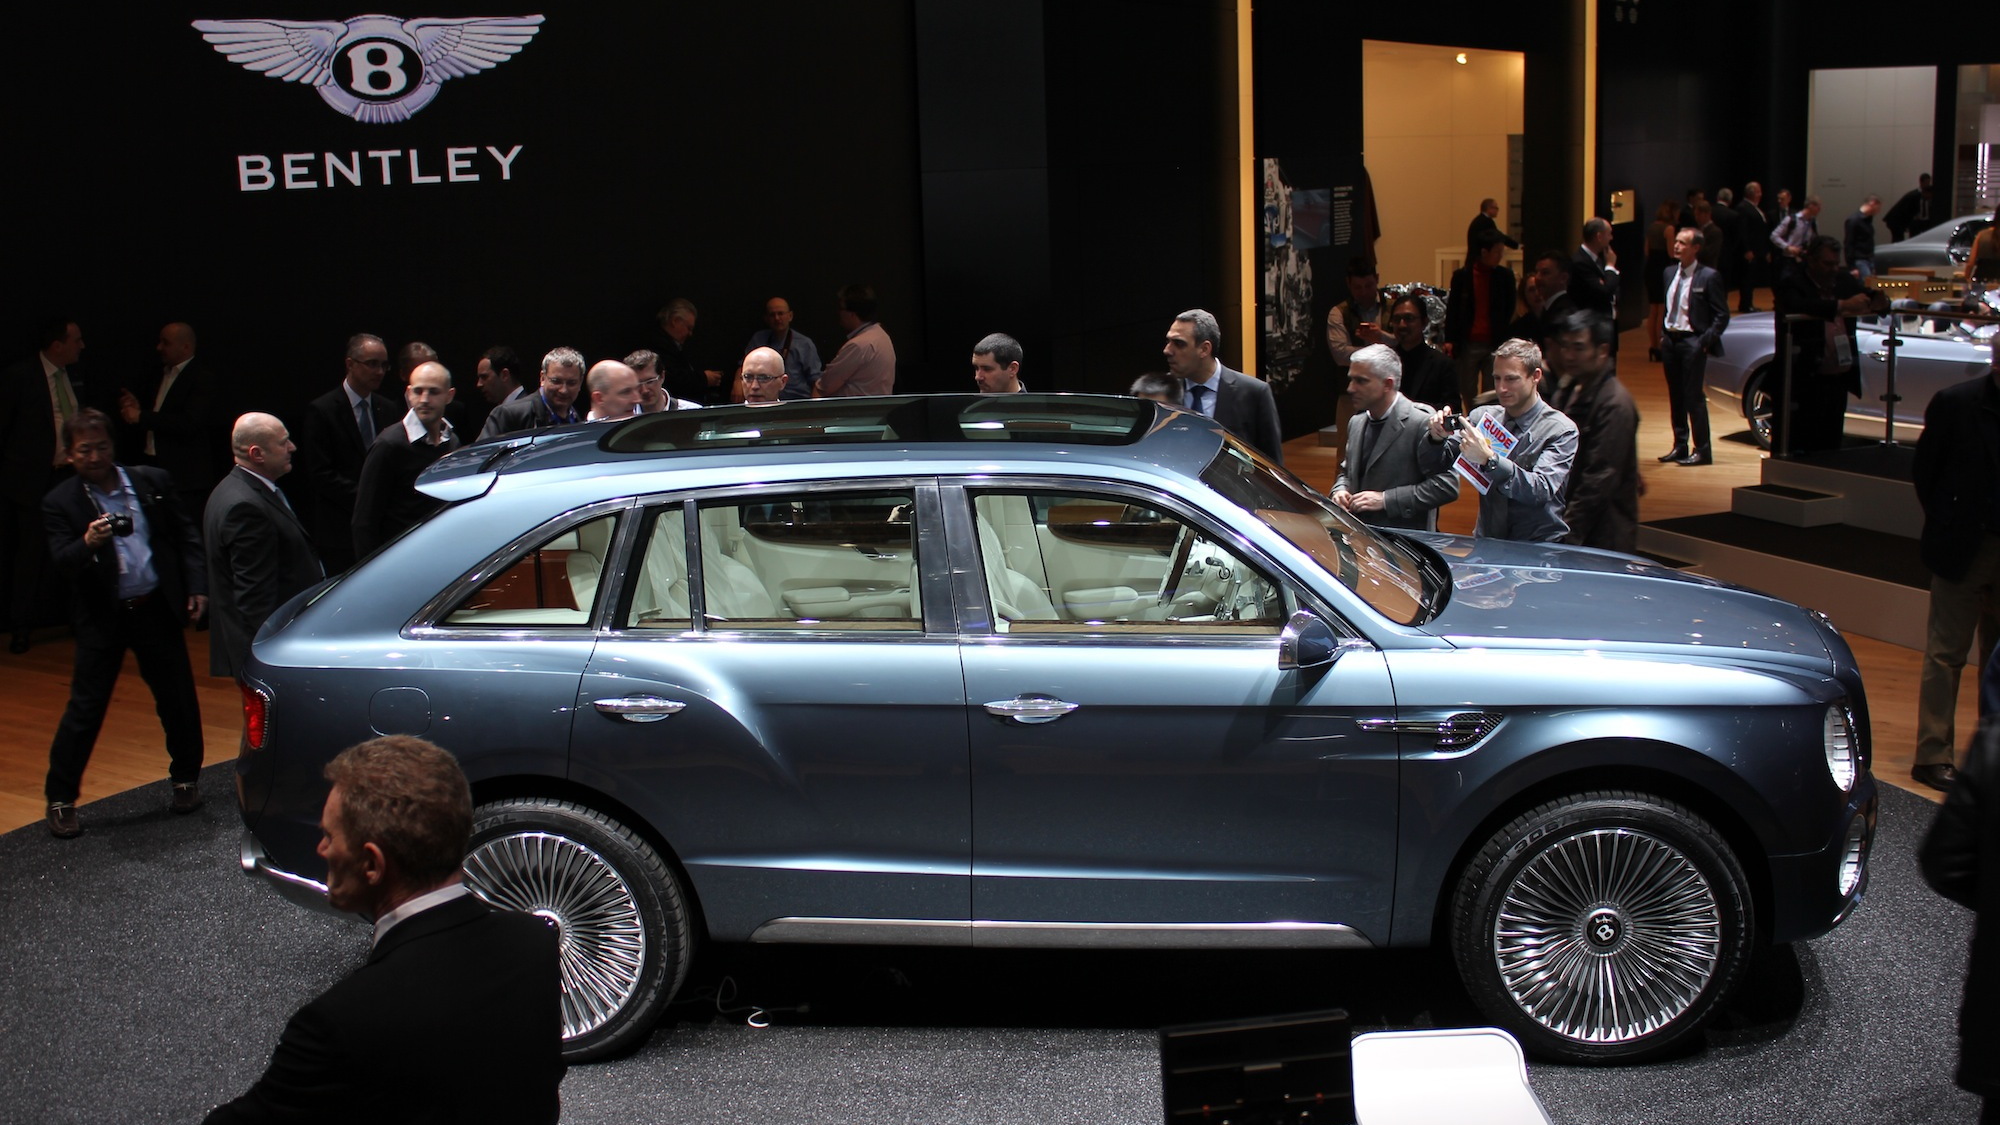 The Future Of Luxury: The 2012 Bentley EXP 9 F Concept